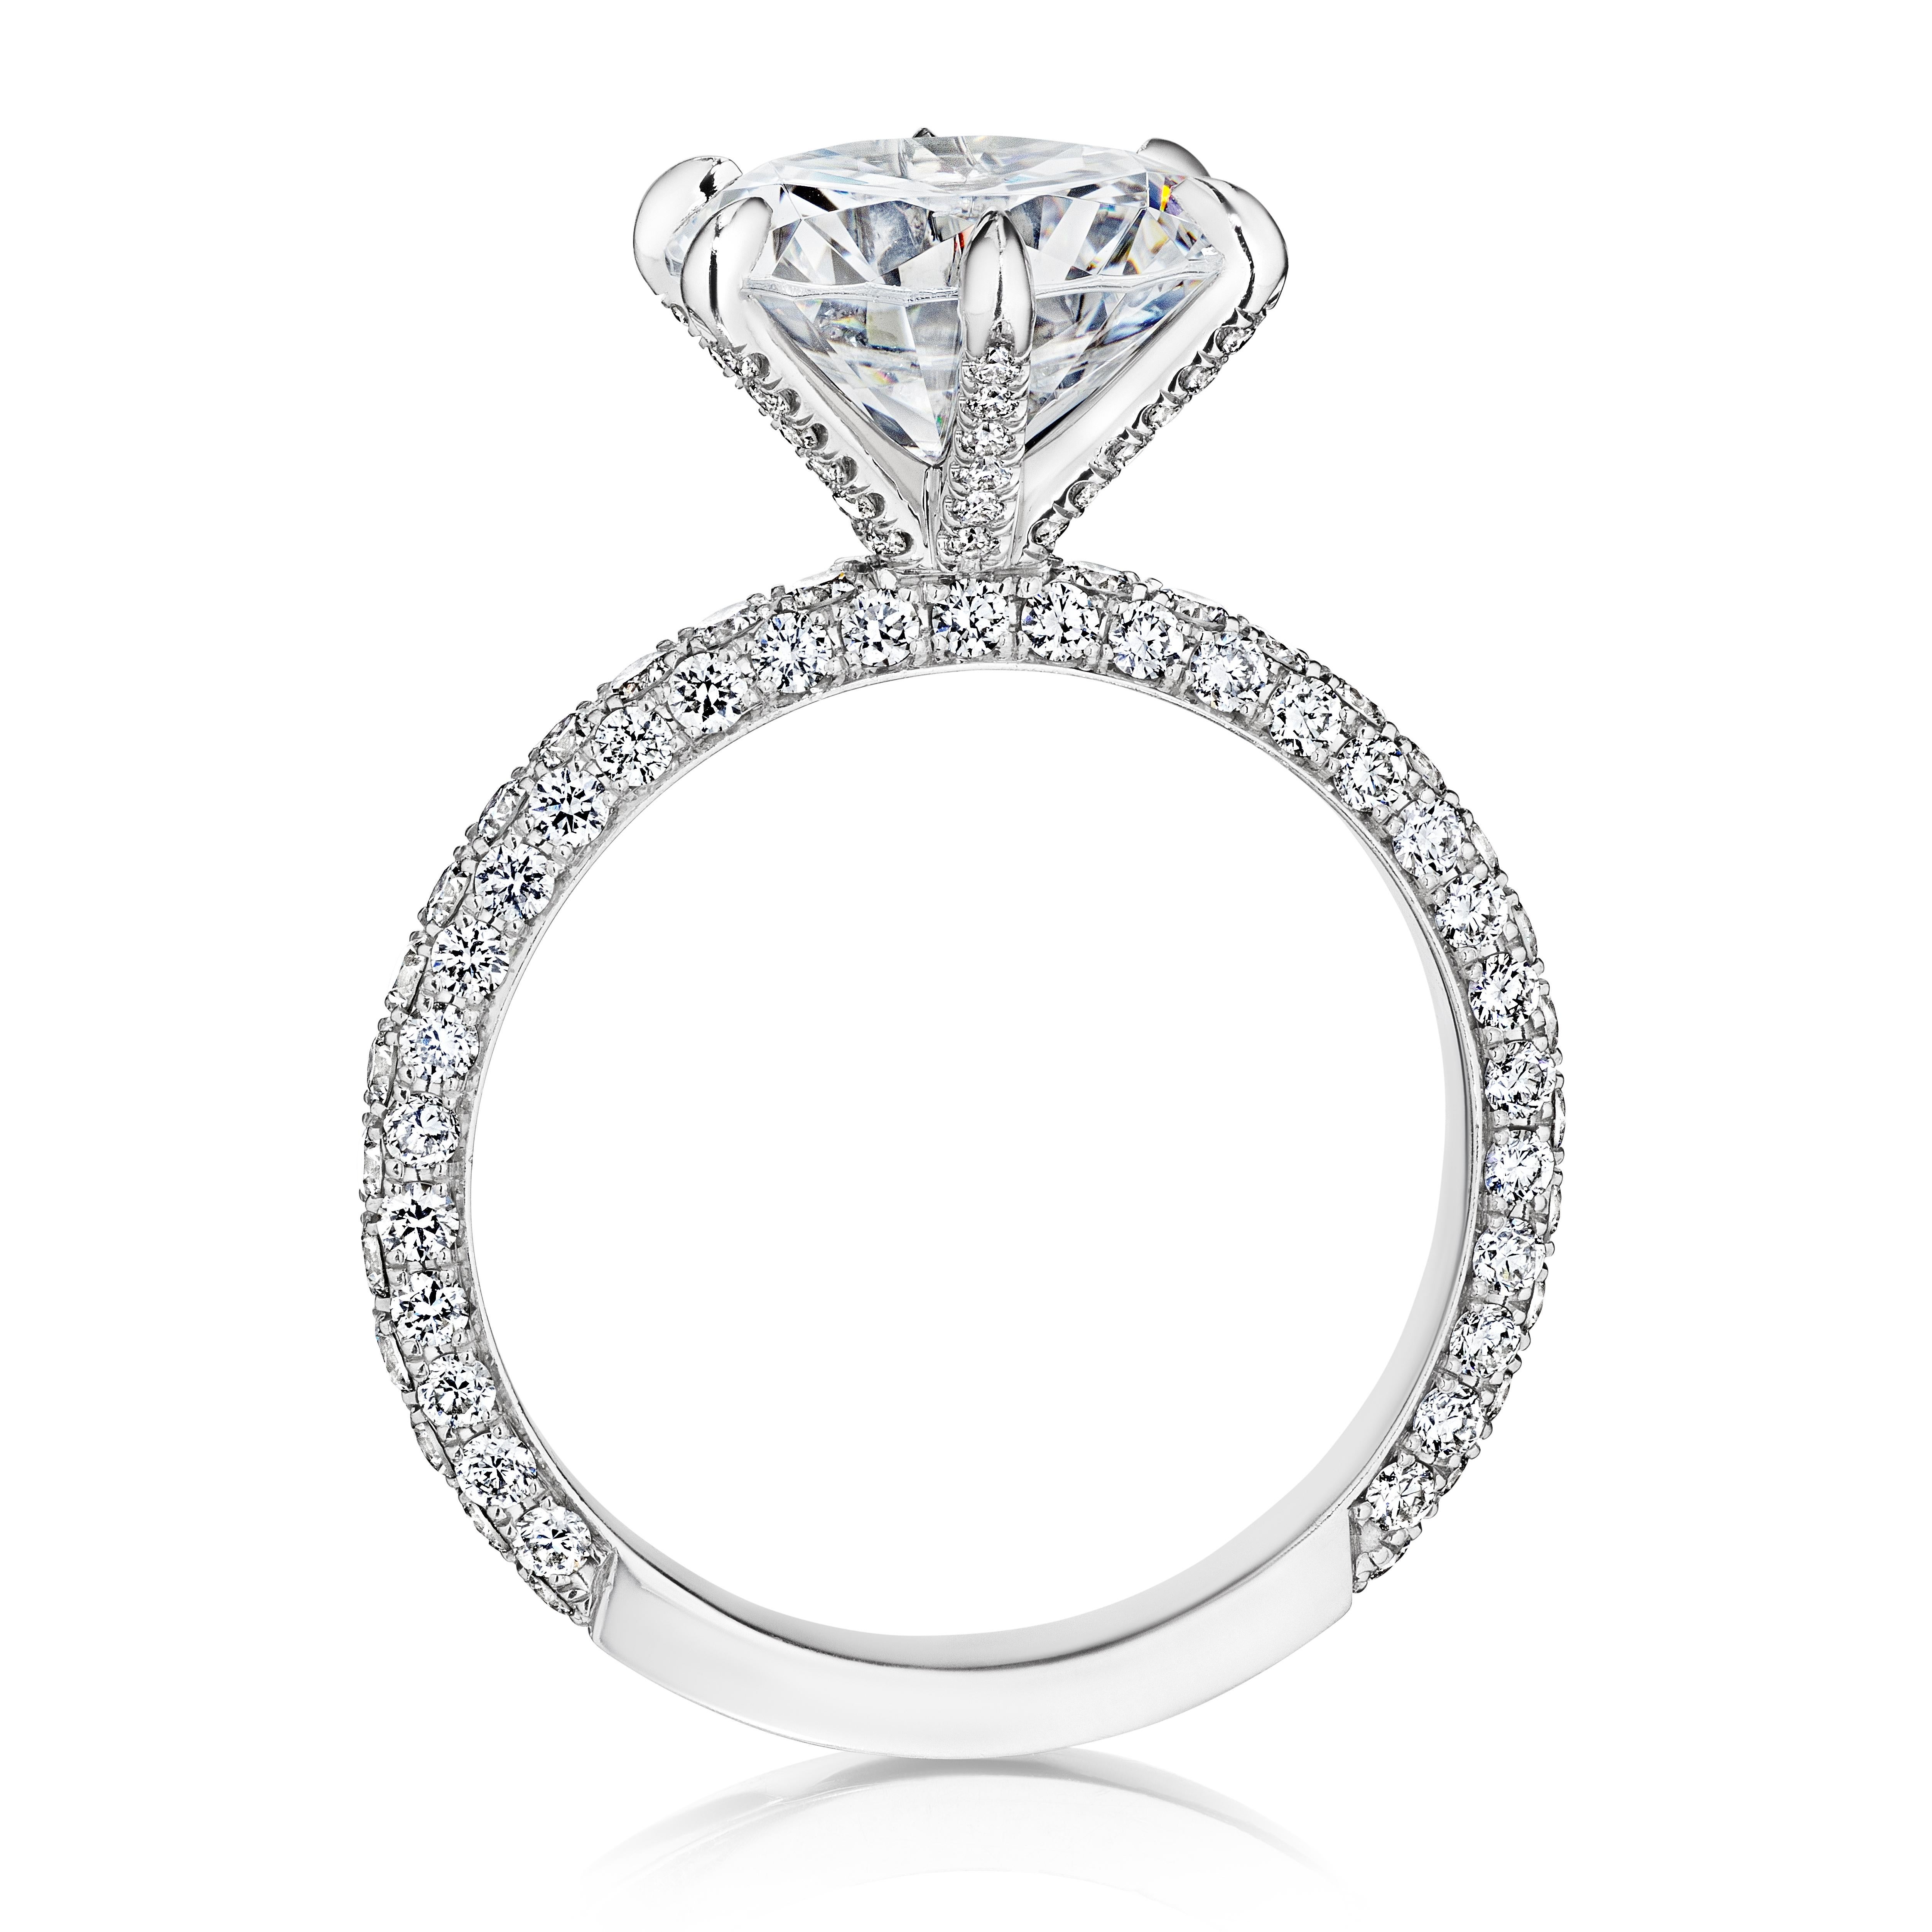 Embrace the extraordinary with 'Elle,' a ring that defines elegance in its purest form. This exquisite engagement ring boasts a GIA Certified 3.50 Carat Round Diamond that radiates unmatched brilliance. Its E color classification ensures a pristine,